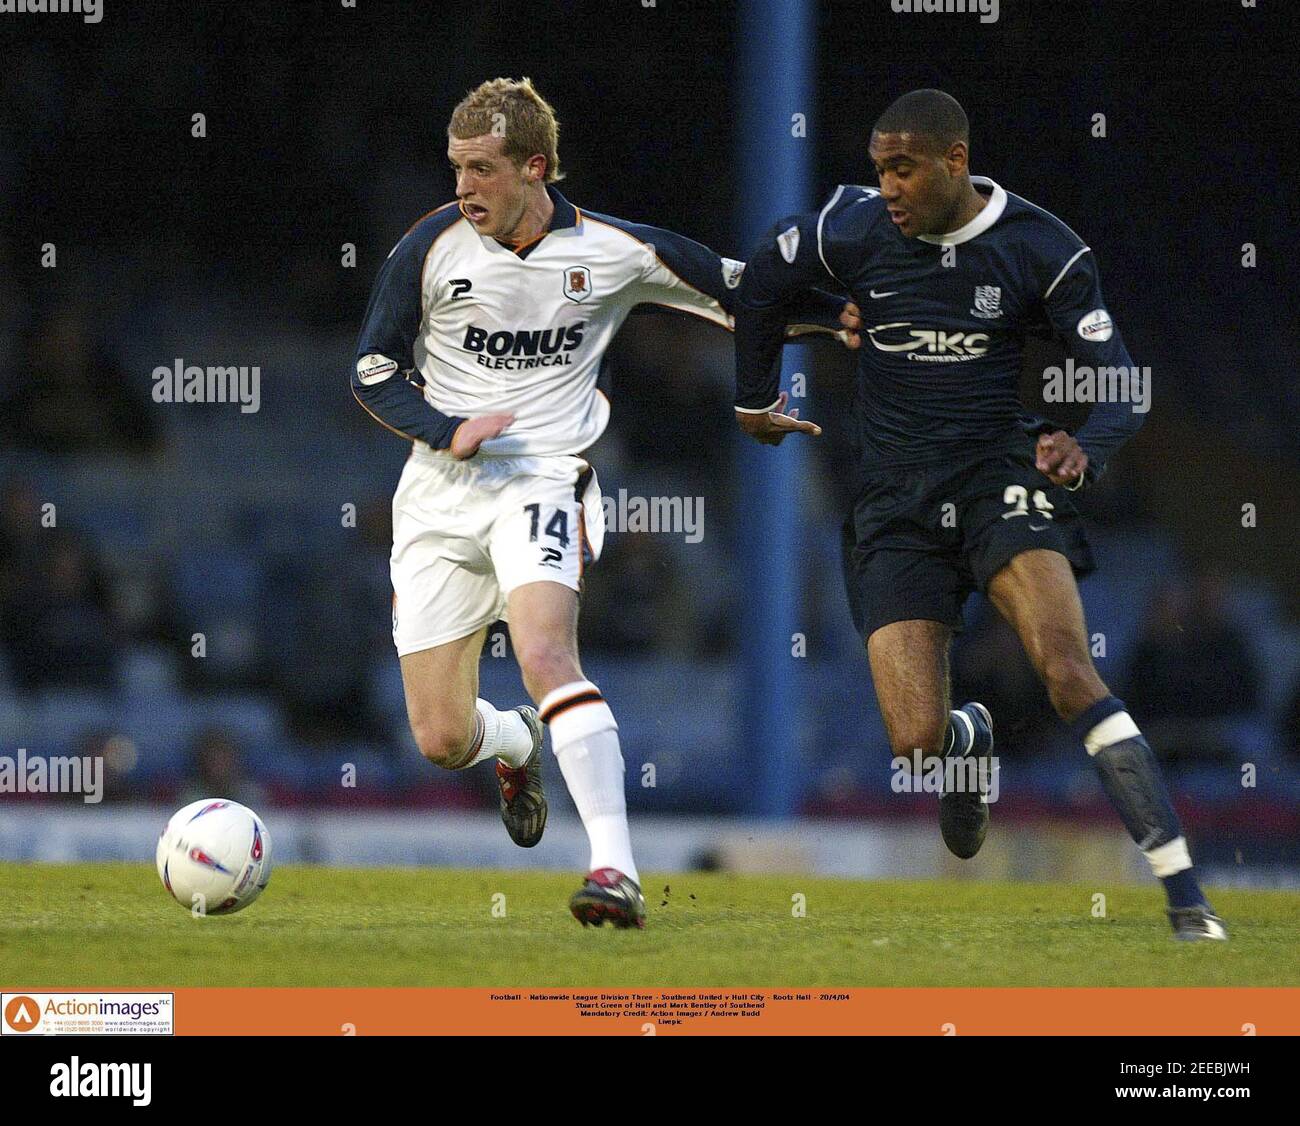 Fußball - Nationwide League Division Three - Southend United gegen Hull City - Roots Hall - 20/4/04 Stuart Green von Hull und Mark Bentley von Southend Mandatory Credit: Action Images / Andrew Budd Livepic Stockfoto